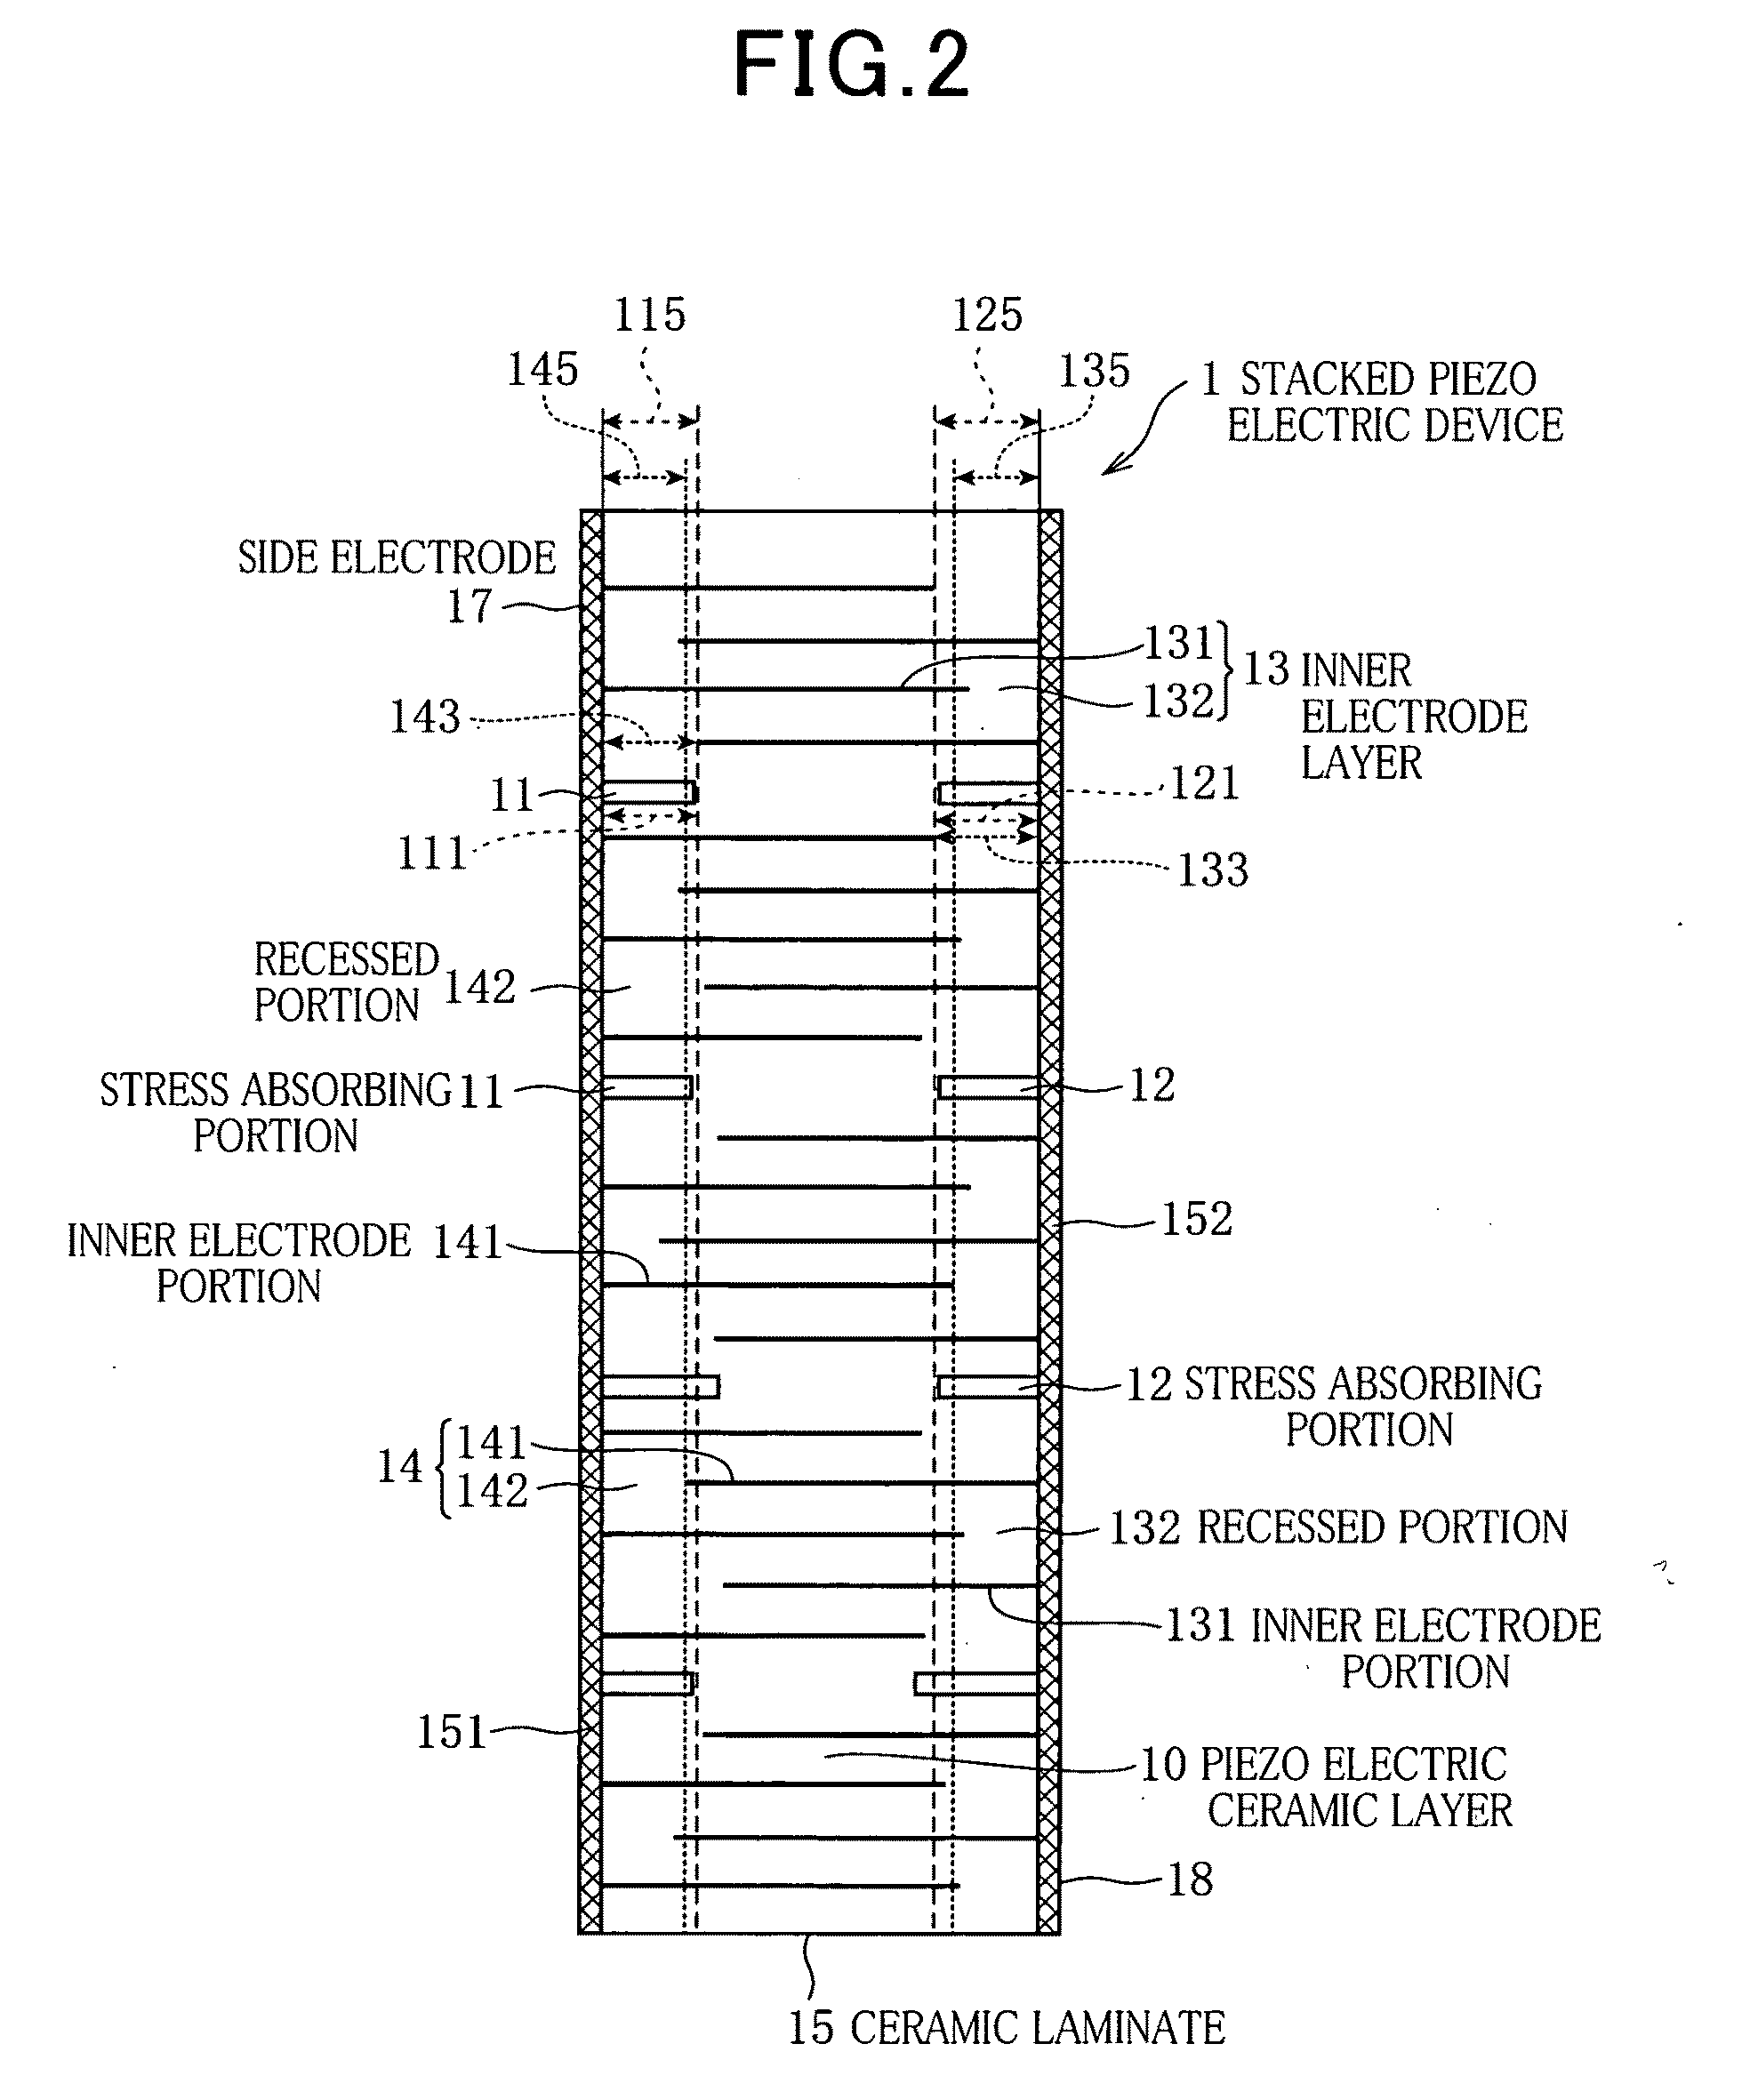 Stacked piezoelectric device